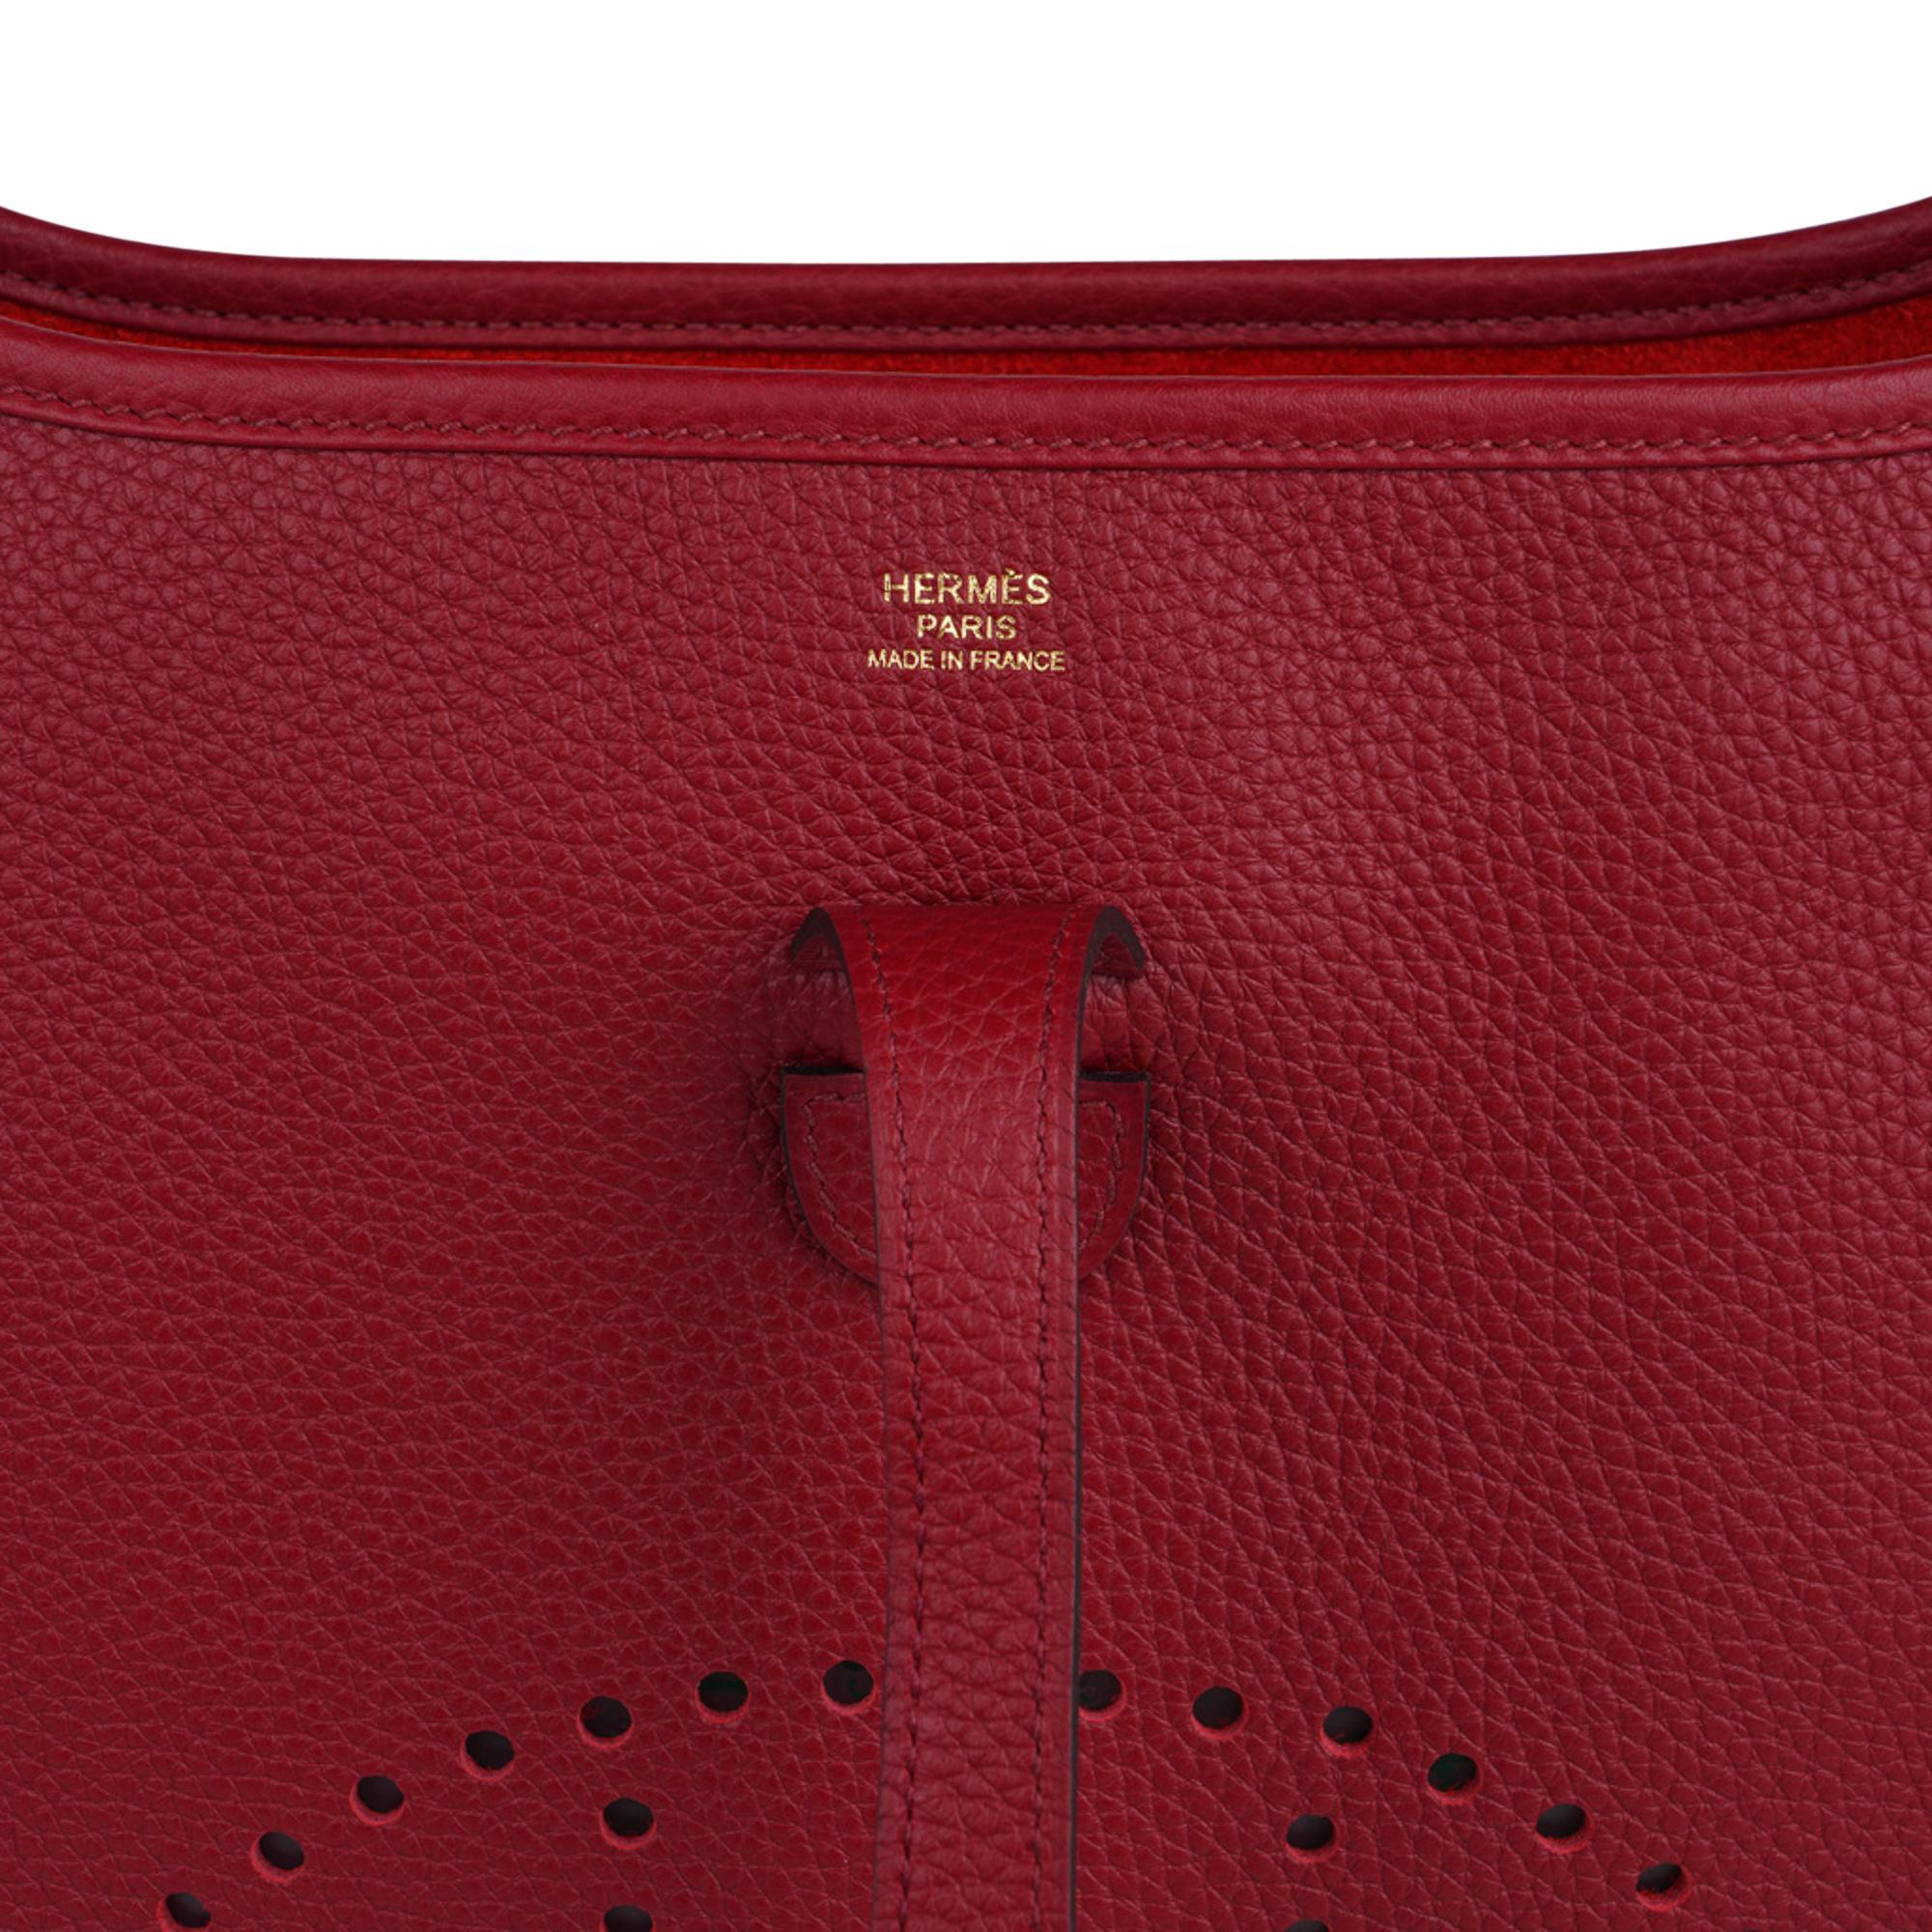 Mightychic offers a guaranteed authentic coveted PM Evelyn Hermes bag featured in rich Rouge Grenat.
Signature perforated H on front of bag.
Sport strap in textile with leather and gold hardware details.
Fabulous shoulder or crossbody bag with roomy